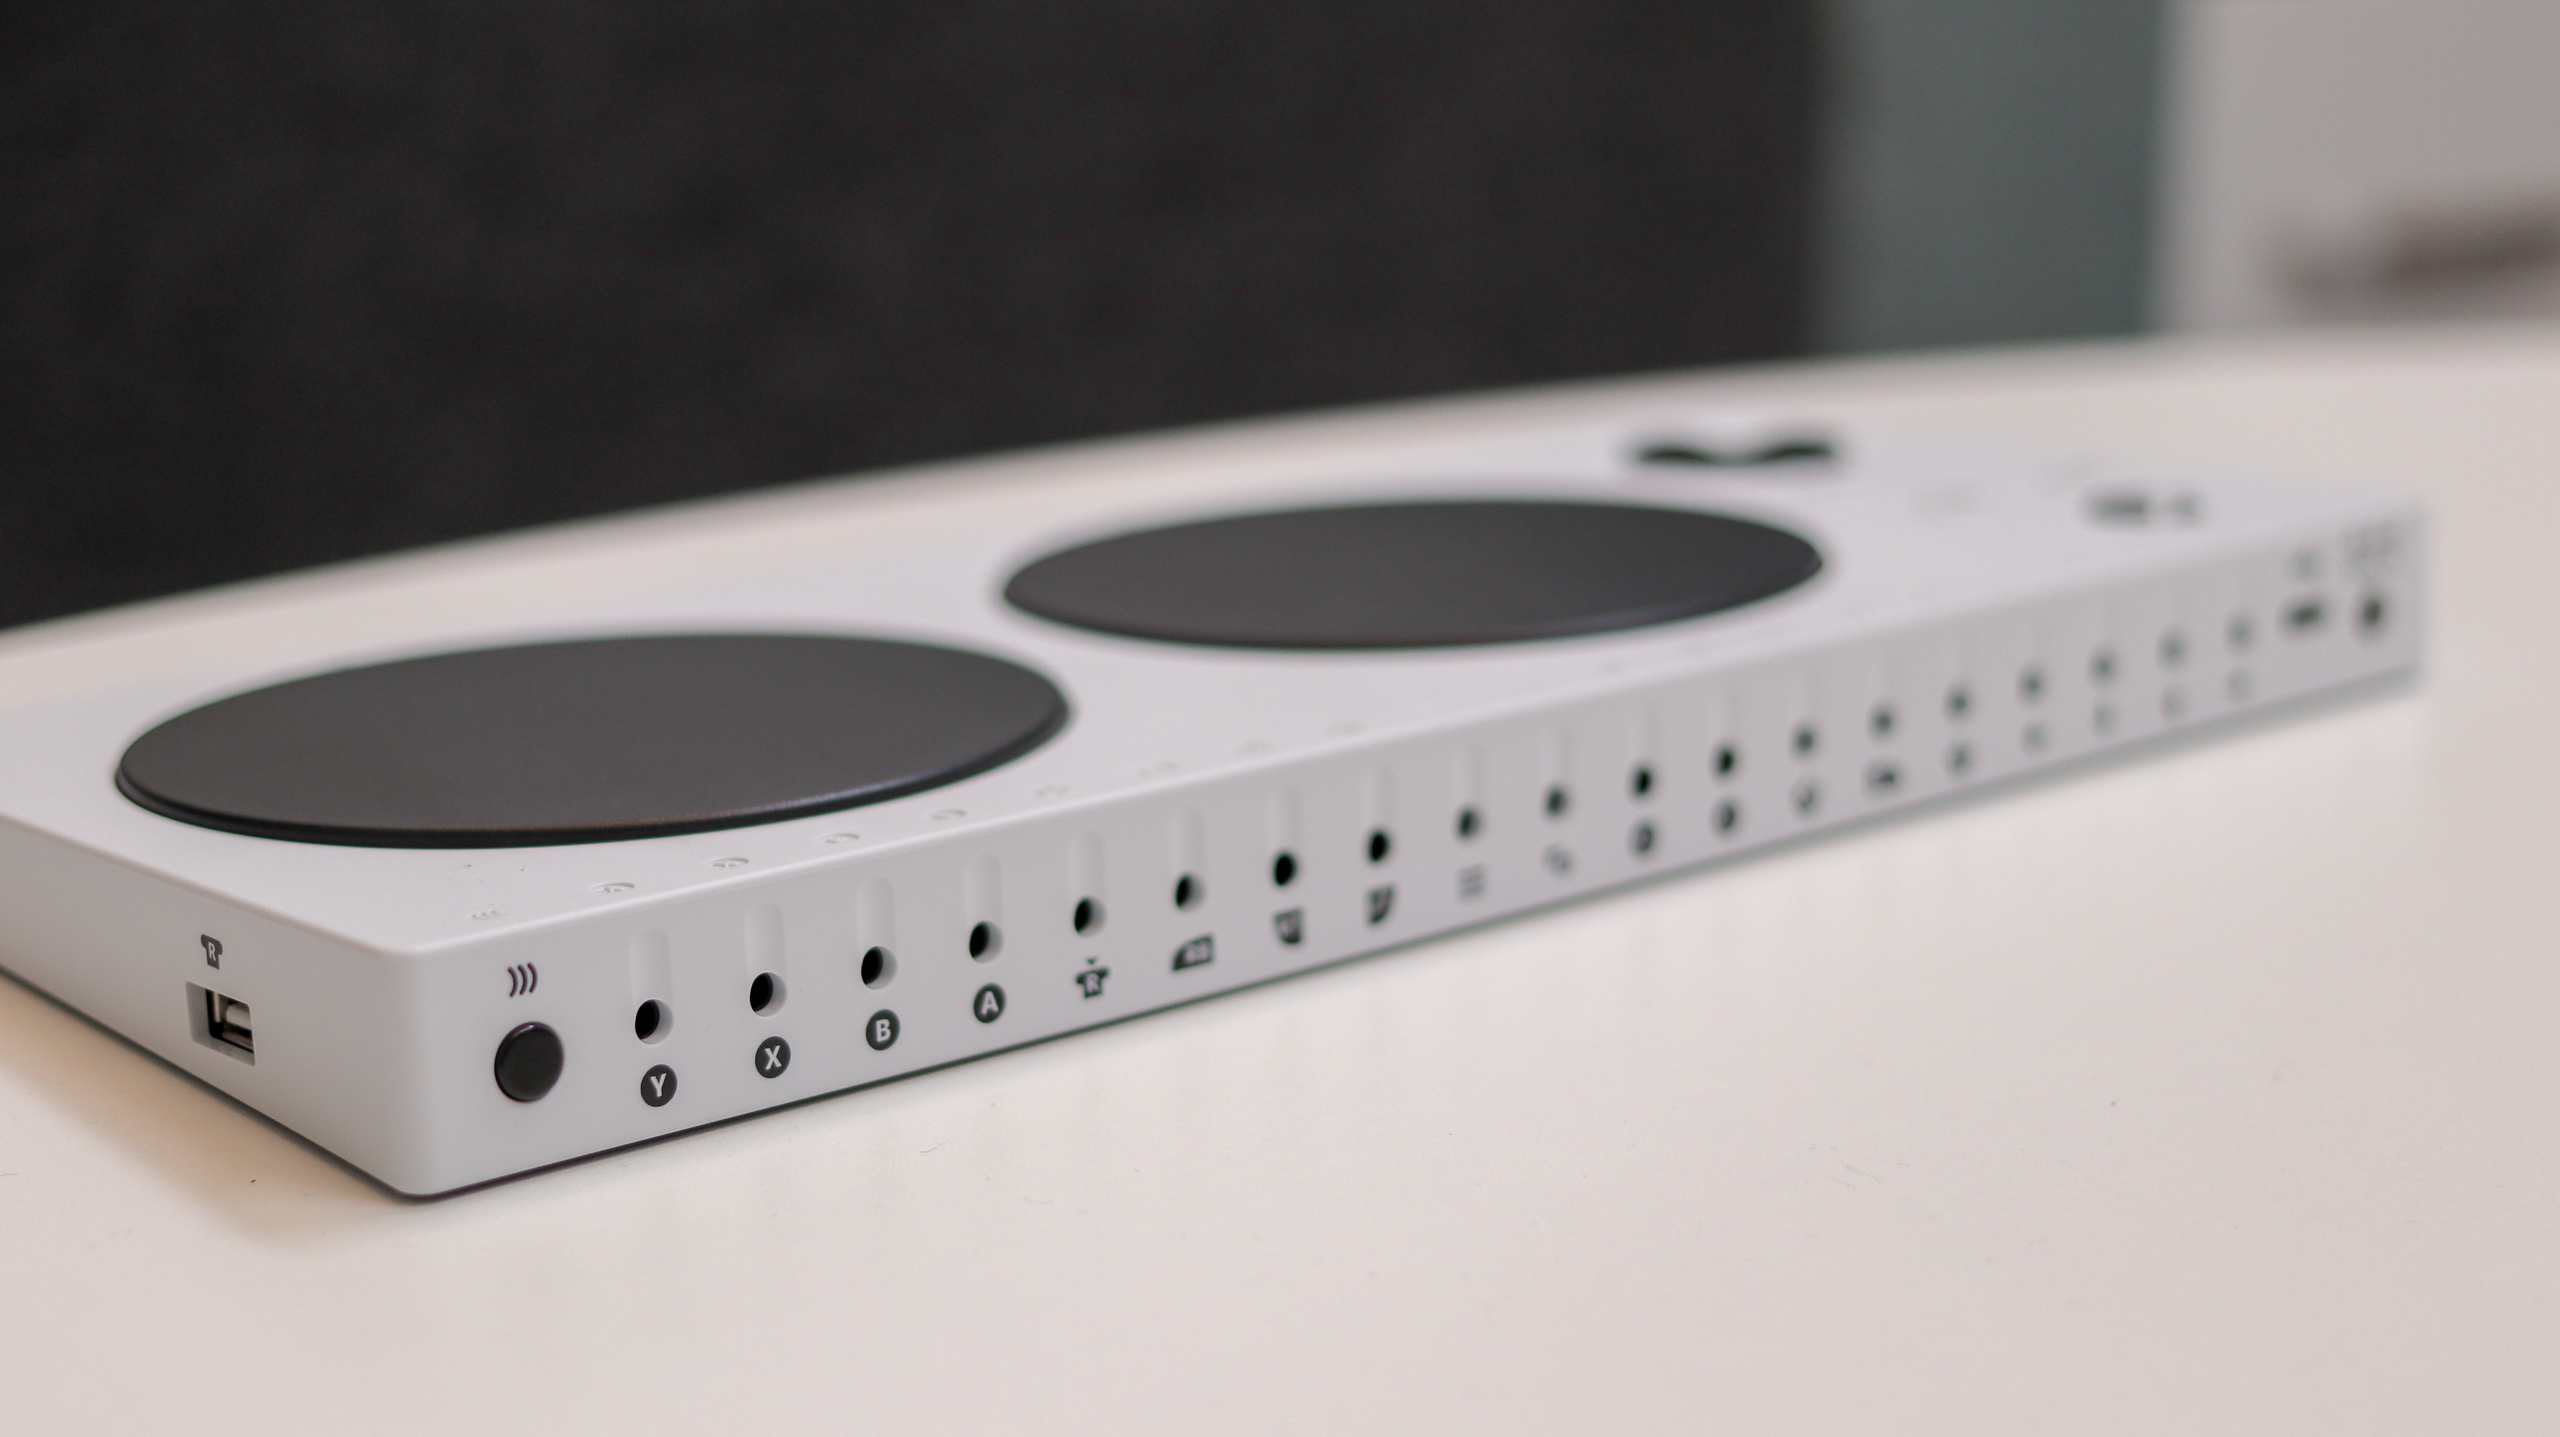 Yes, the Xbox Adaptive Controller is innovative - if you can 